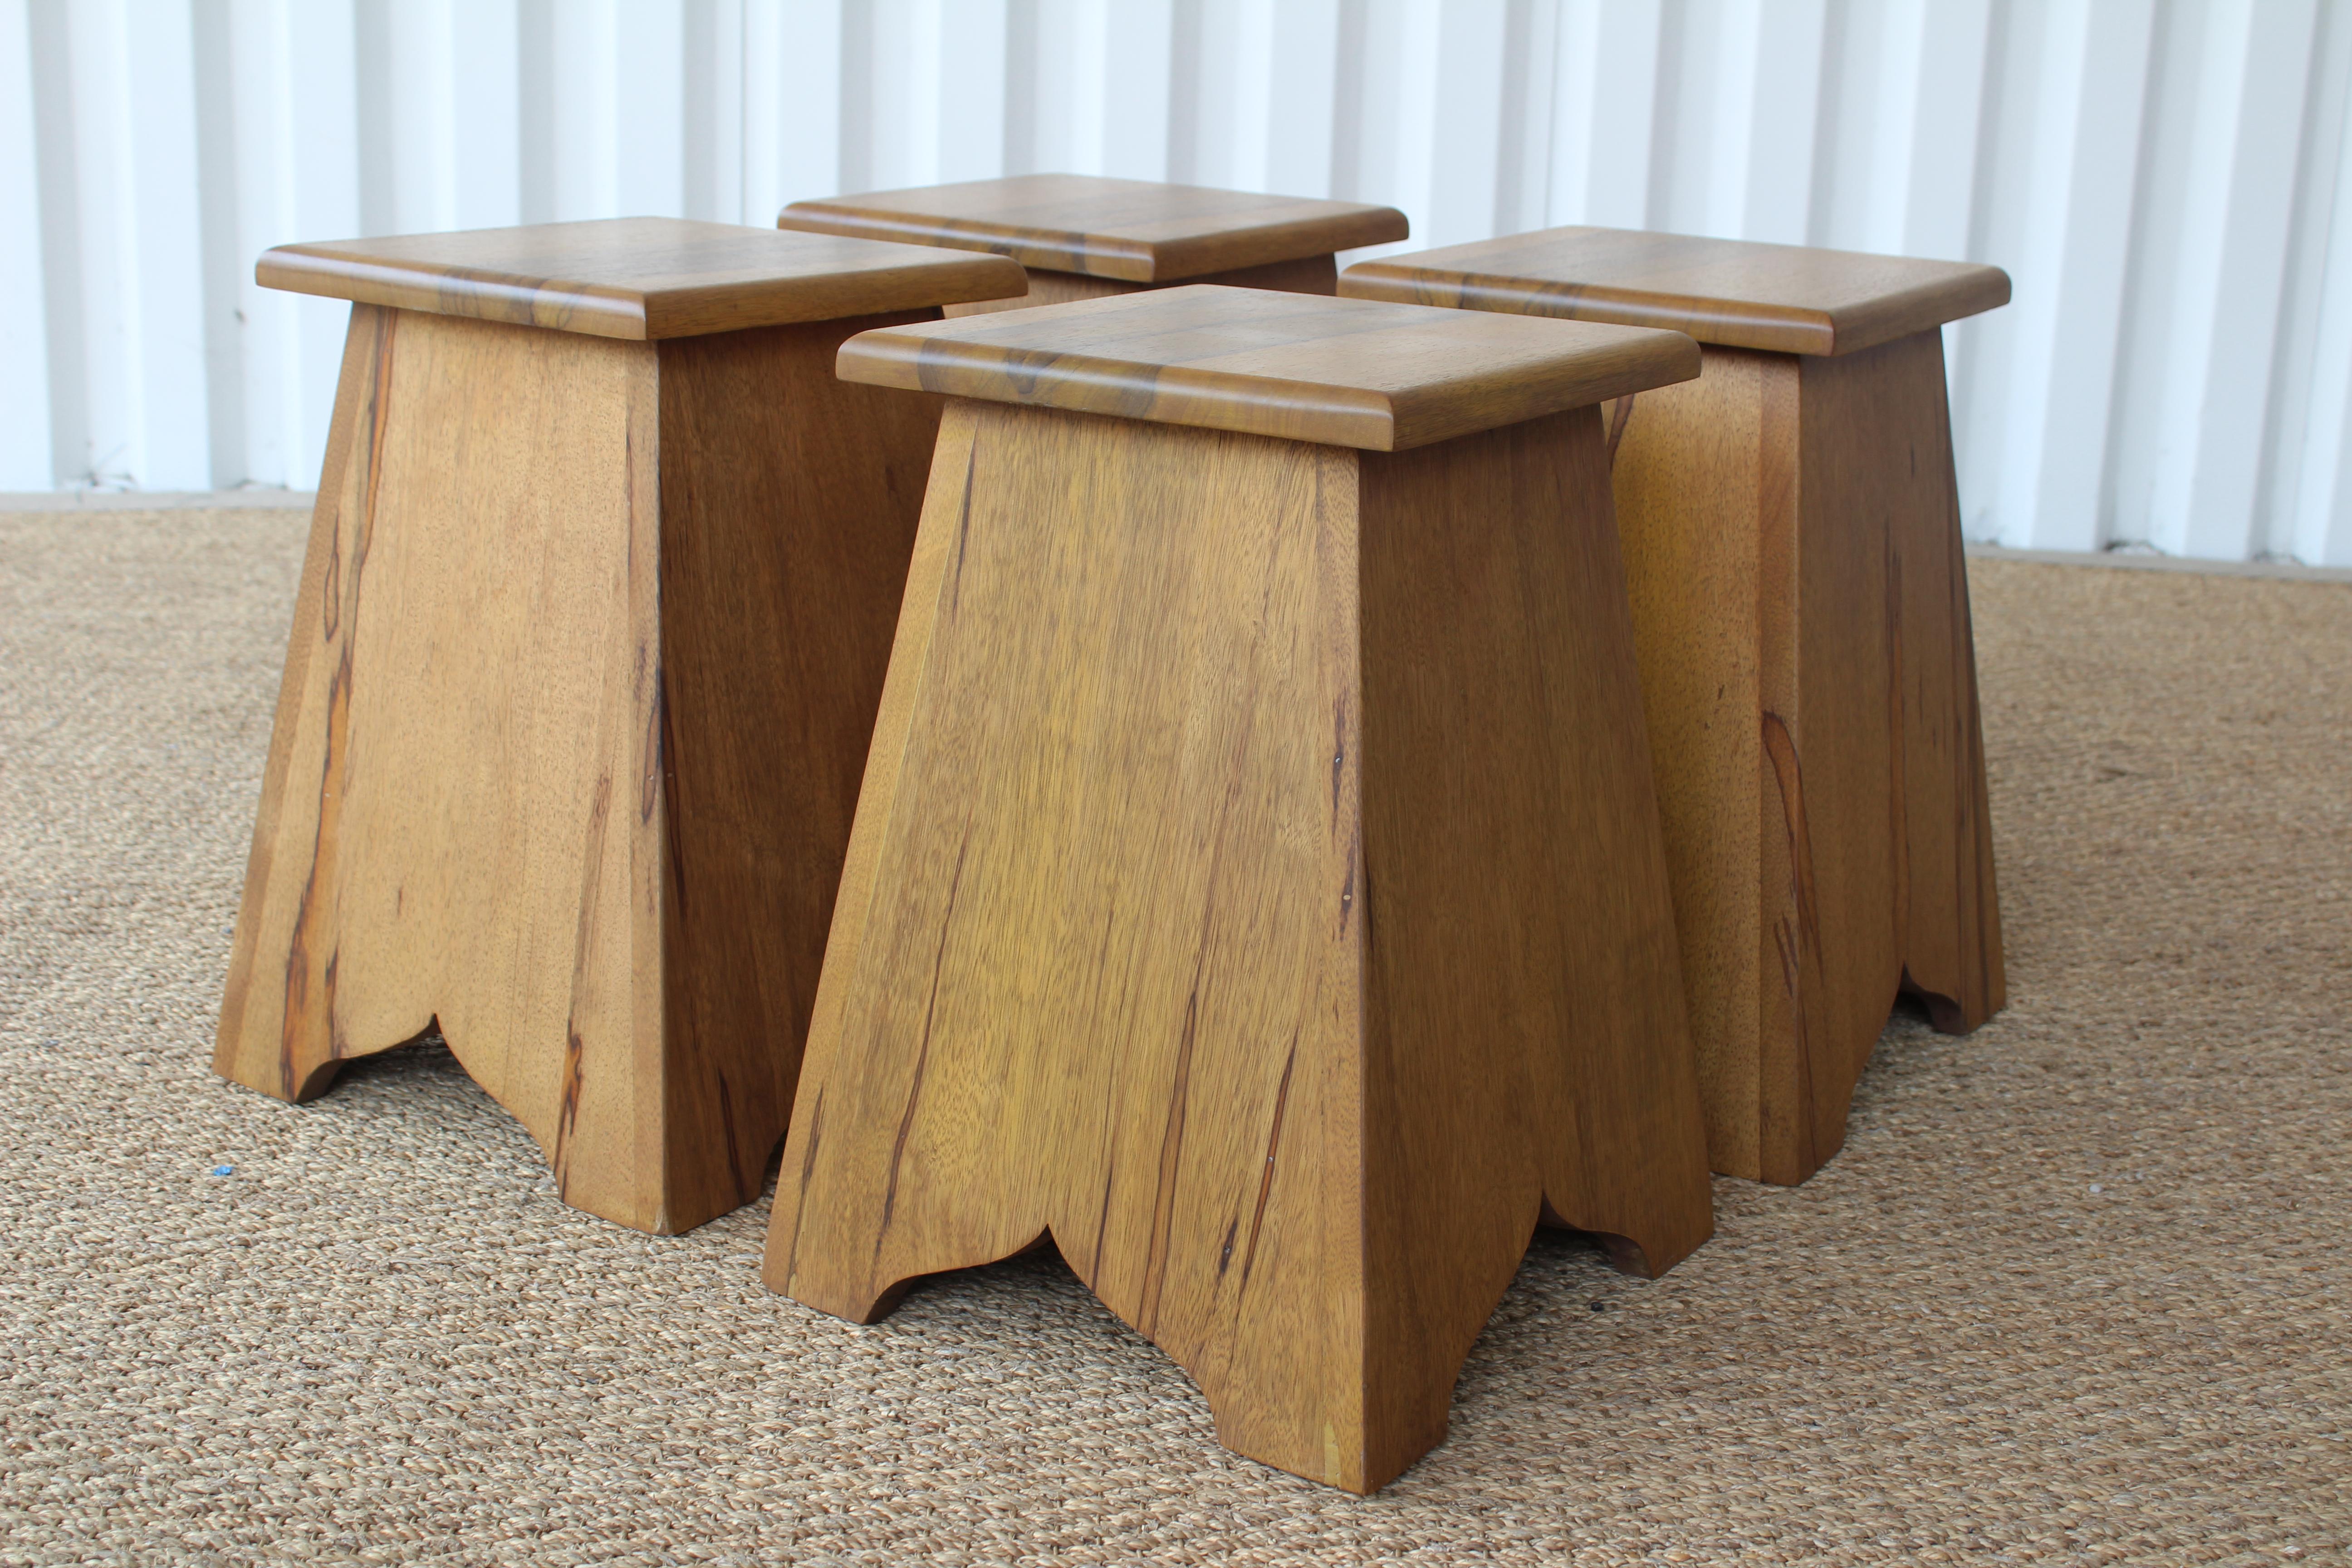 French Pair of Vintage Olive Wood Tables, France, 1960s. One Pair Available.